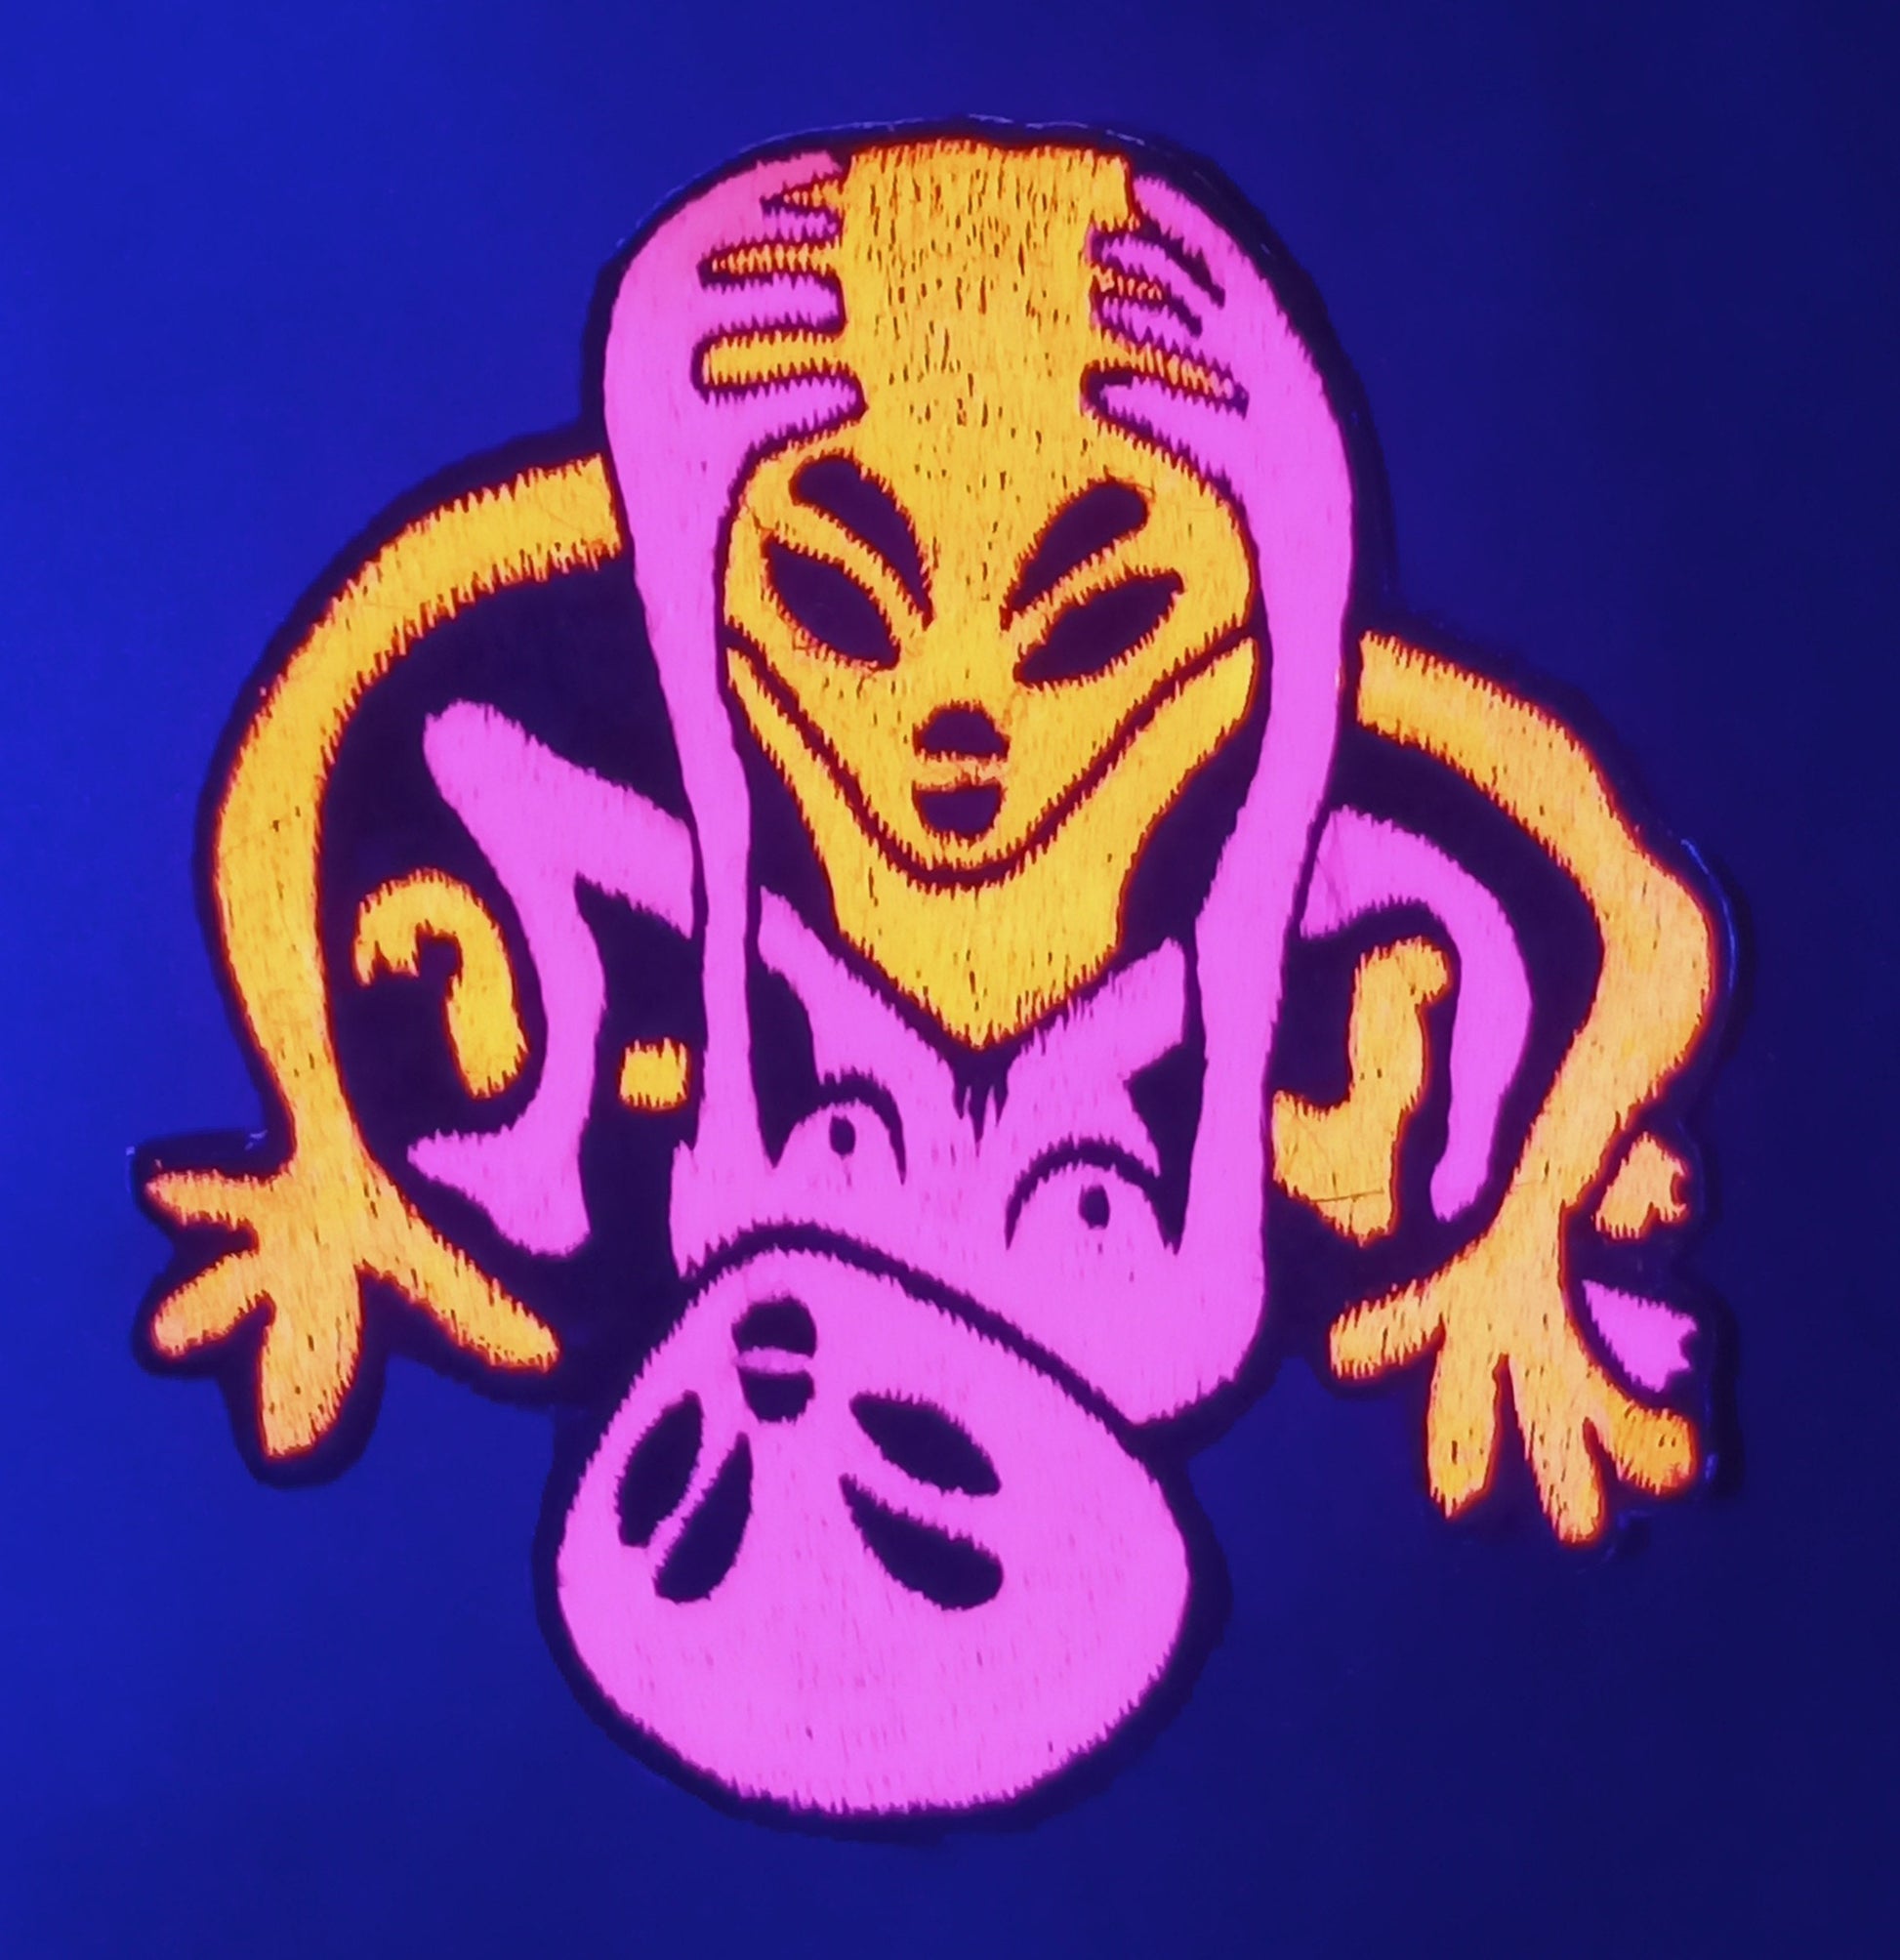 Alien Sex Patch blacklight glowing embroidery - 3.5 inches - UV shining psychedelic Psytrance Extraterrestrial Love is Fun Goa Trance Party